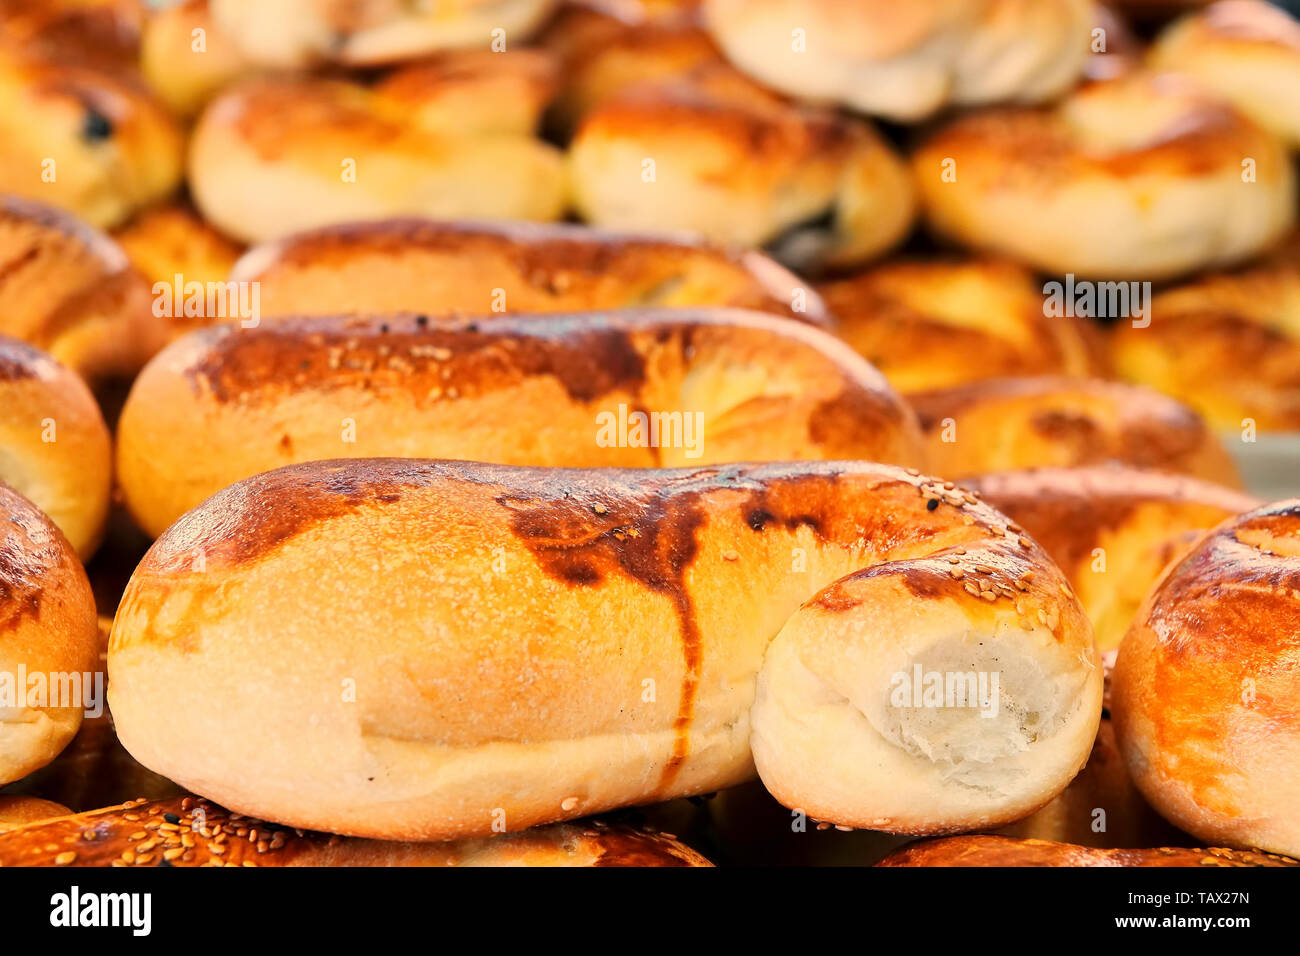 Delicious Savory Pastry Food For Breakfast Snack Stock Photo